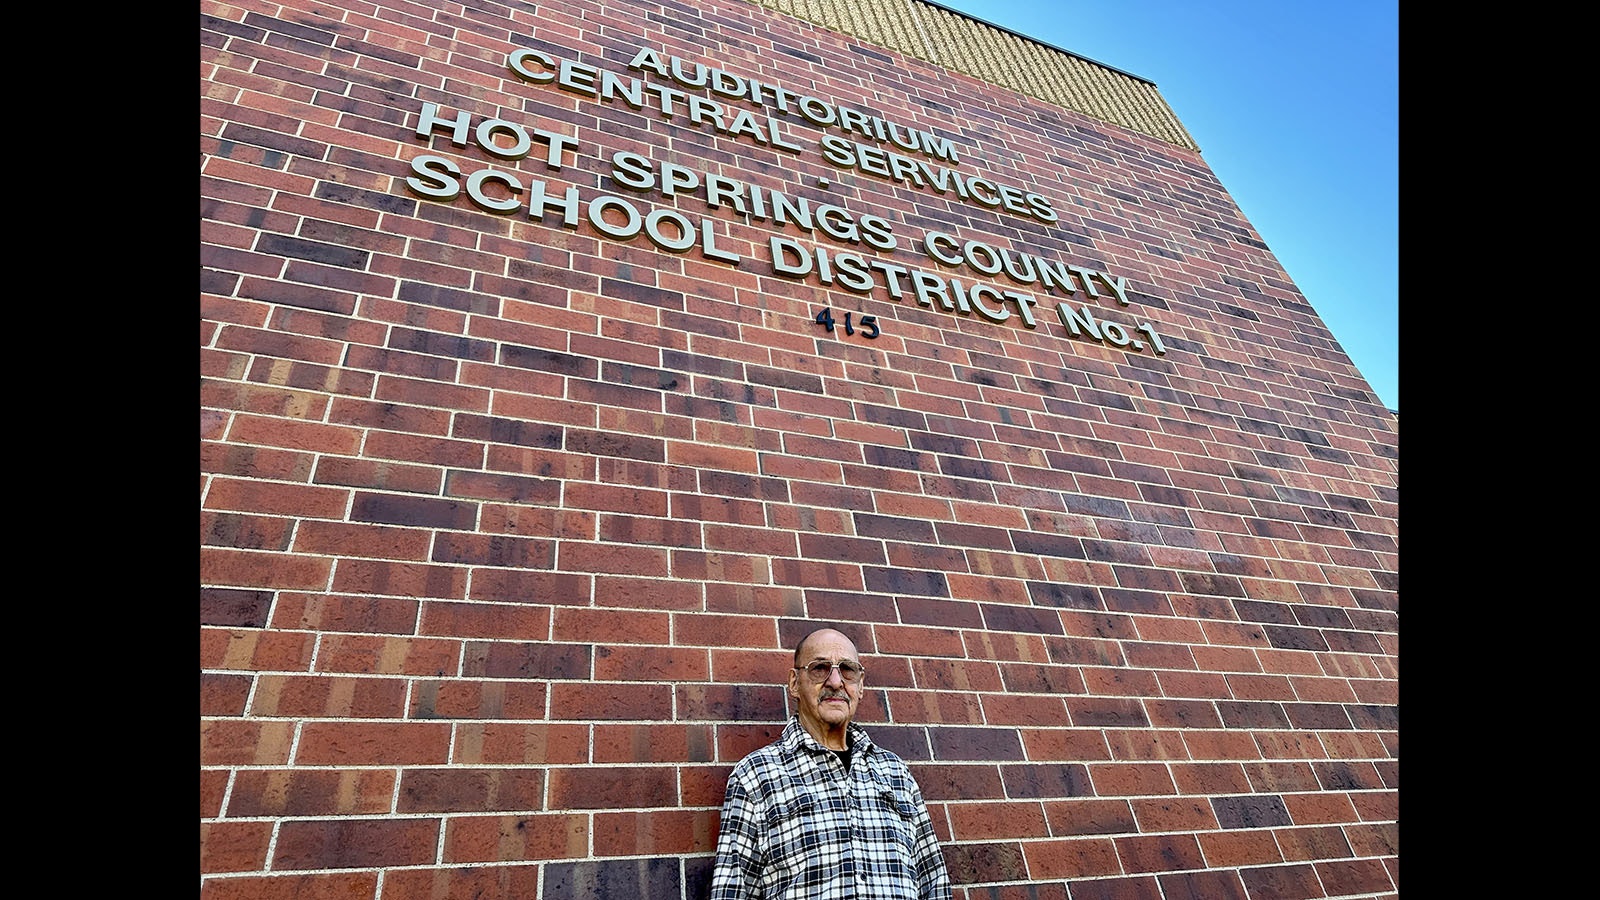 Joe Arnold in front of the building that will soon have his name on it.